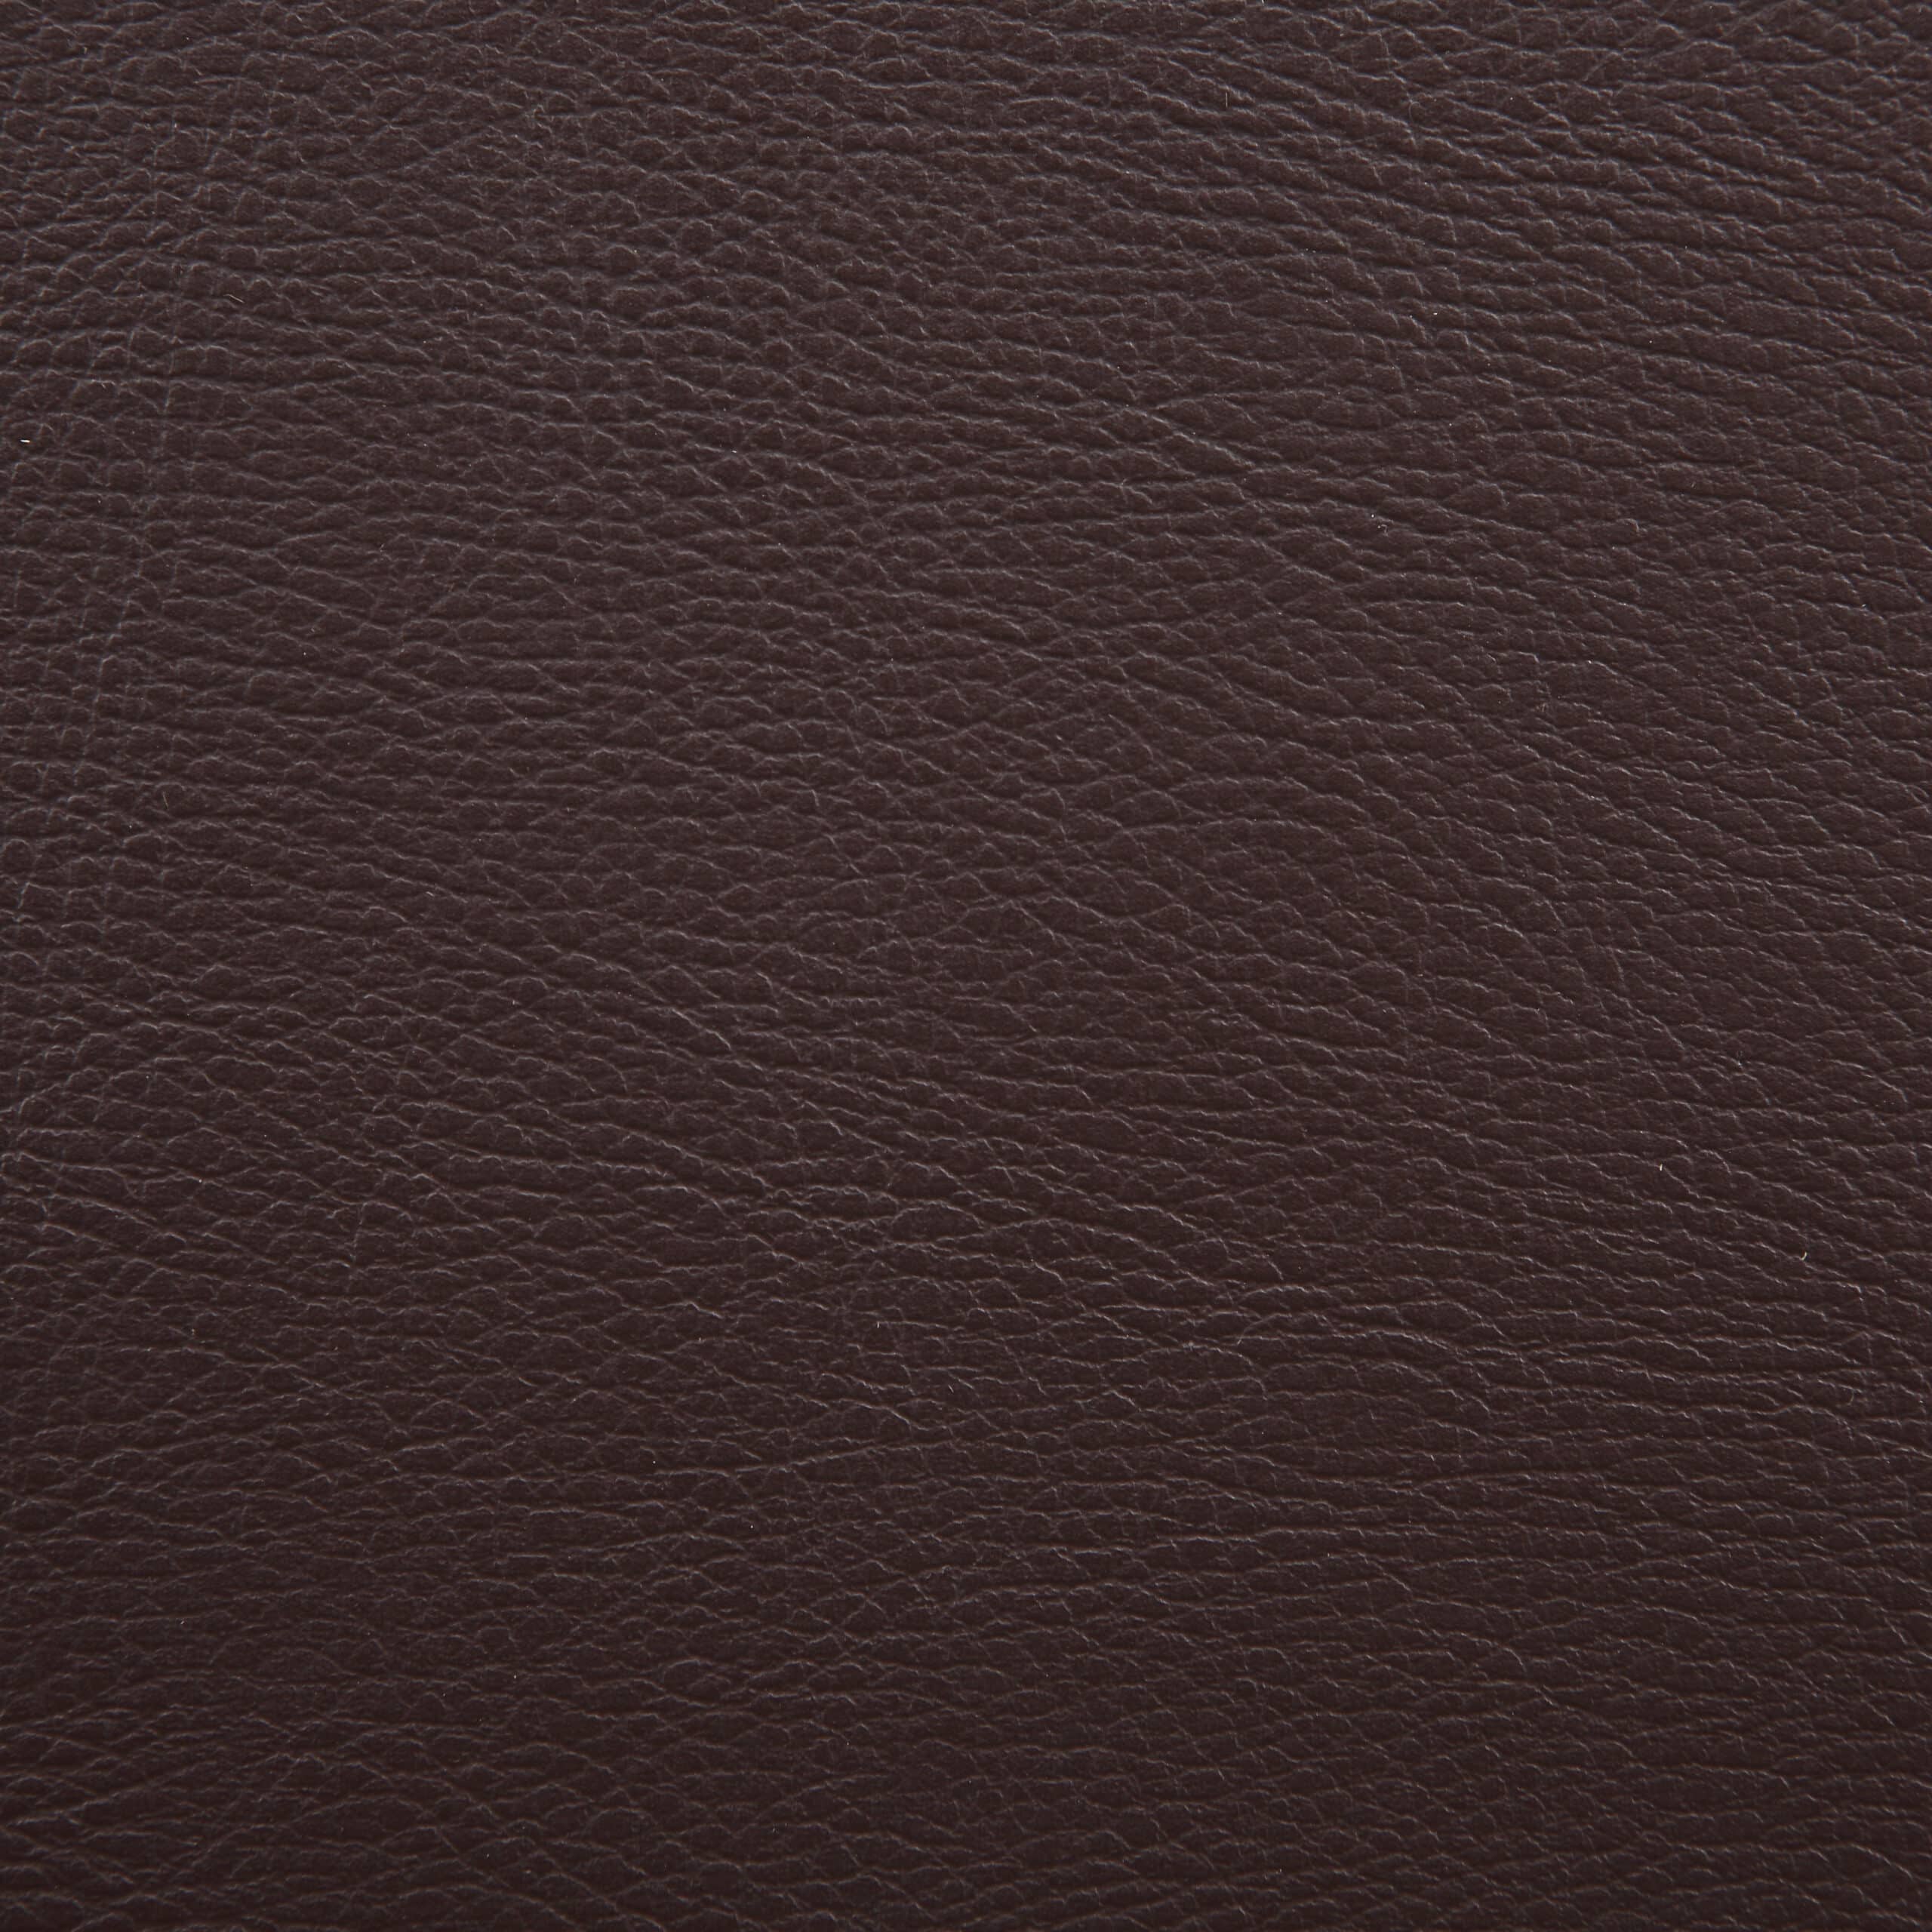 Aviable-finishesBrown Faux Leather